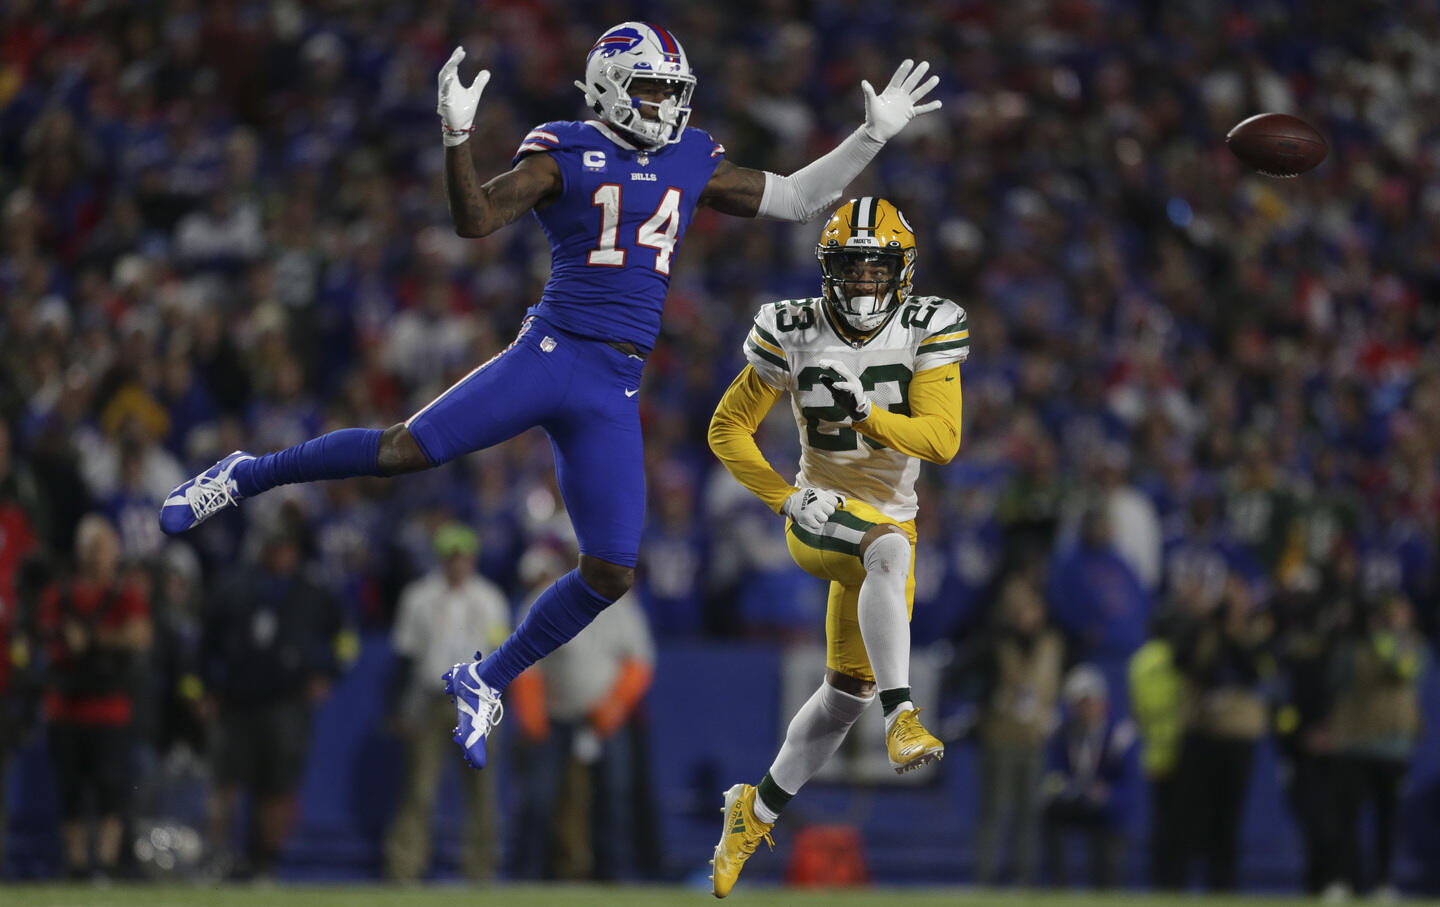 Stefon Diggs, #14 of the Buffalo Bills, leaps for a pass, with Jaire Alexander, #23 of the Green Bay Packers, in pursuit, October 30, 2022. (Joshua Bessex / Getty Images)